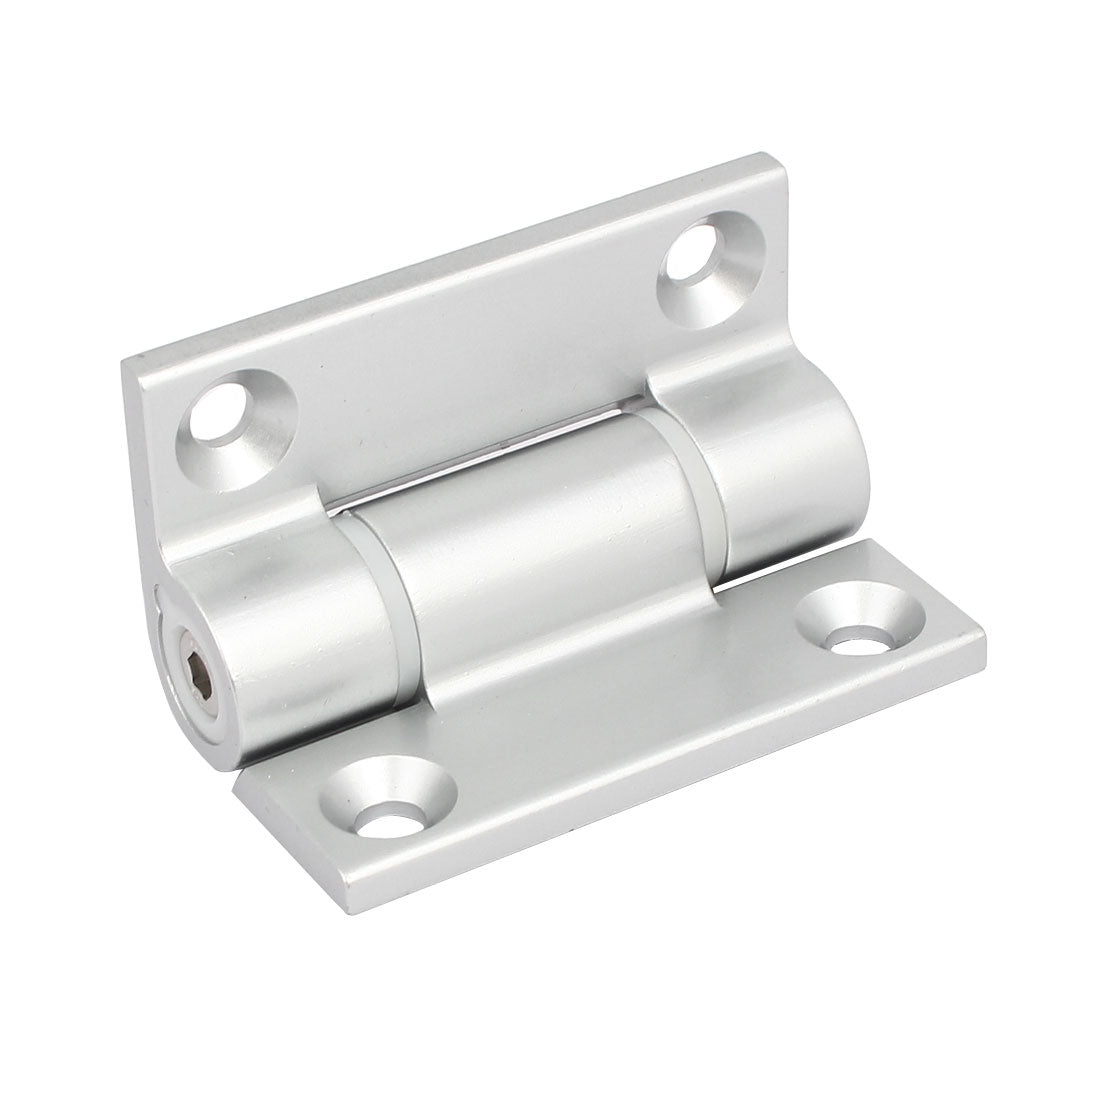 uxcell Uxcell Household Cabinet Door Zinc Alloy Adjustable Bearing Hinge Silver Tone